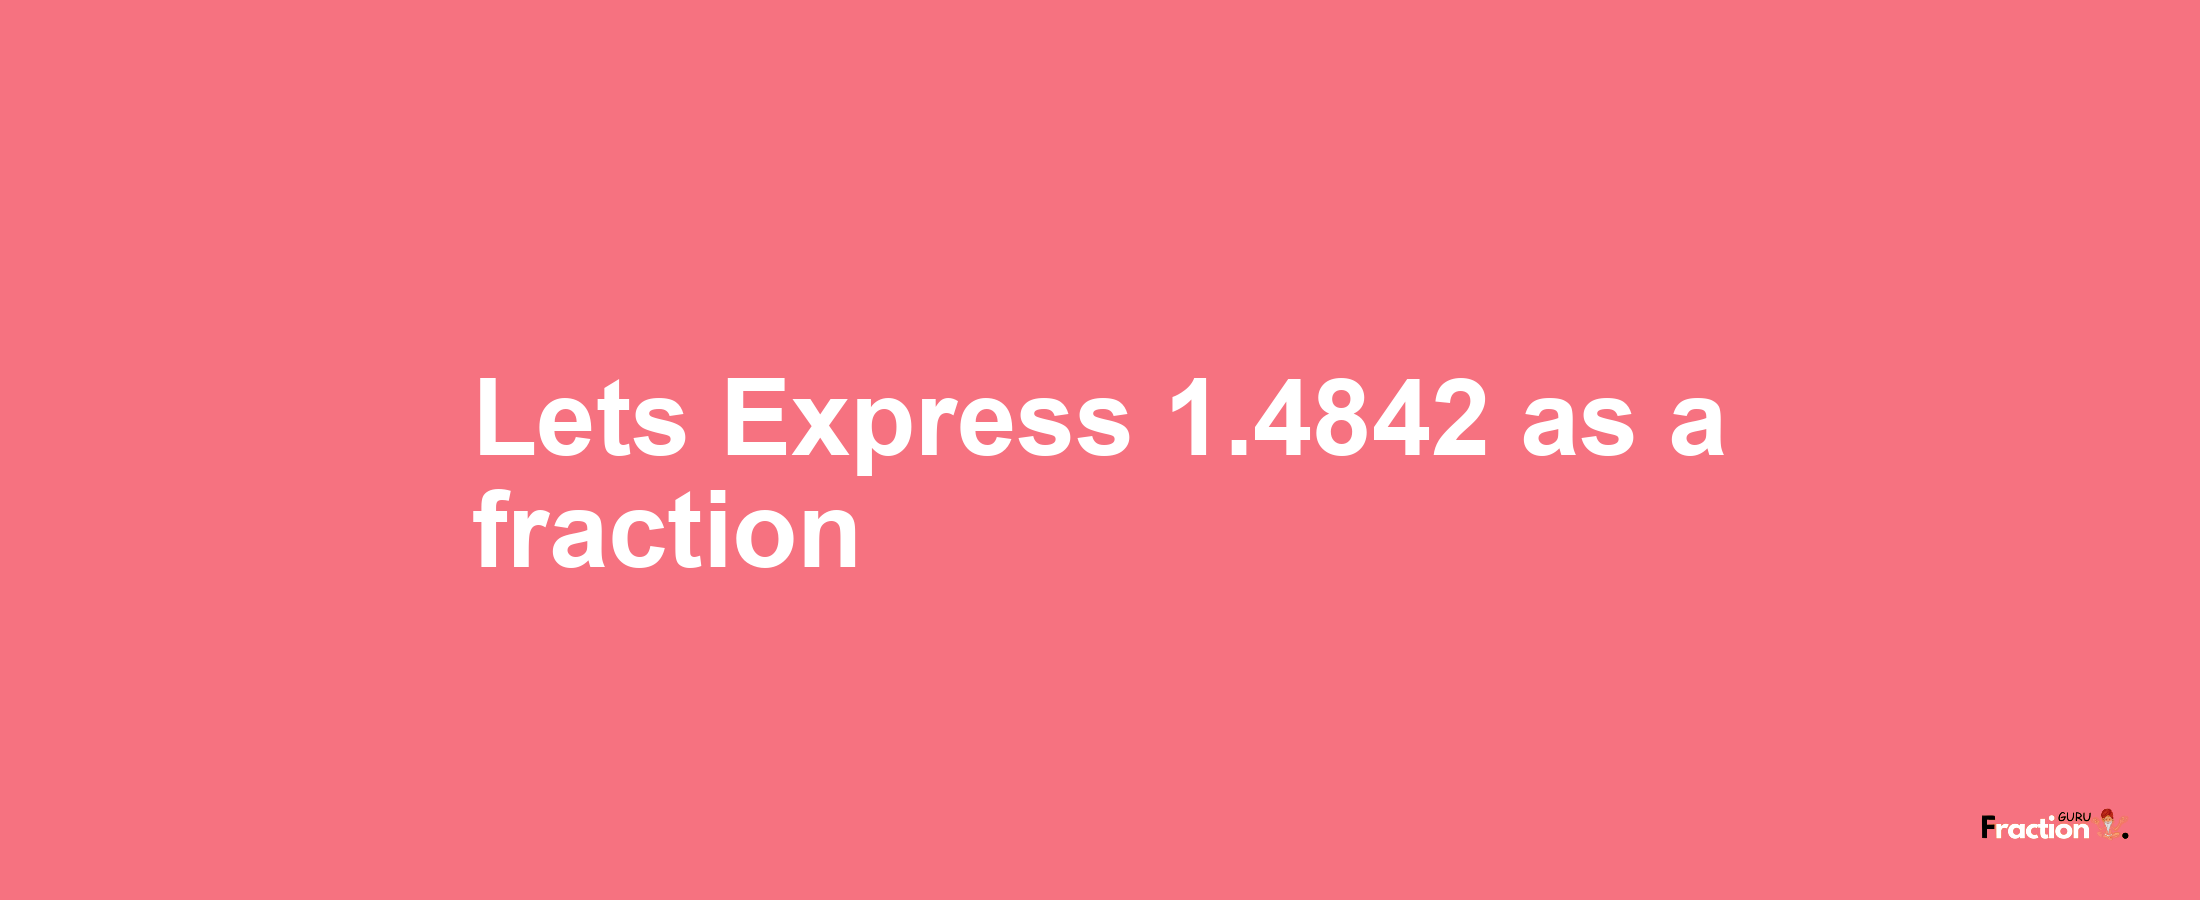 Lets Express 1.4842 as afraction